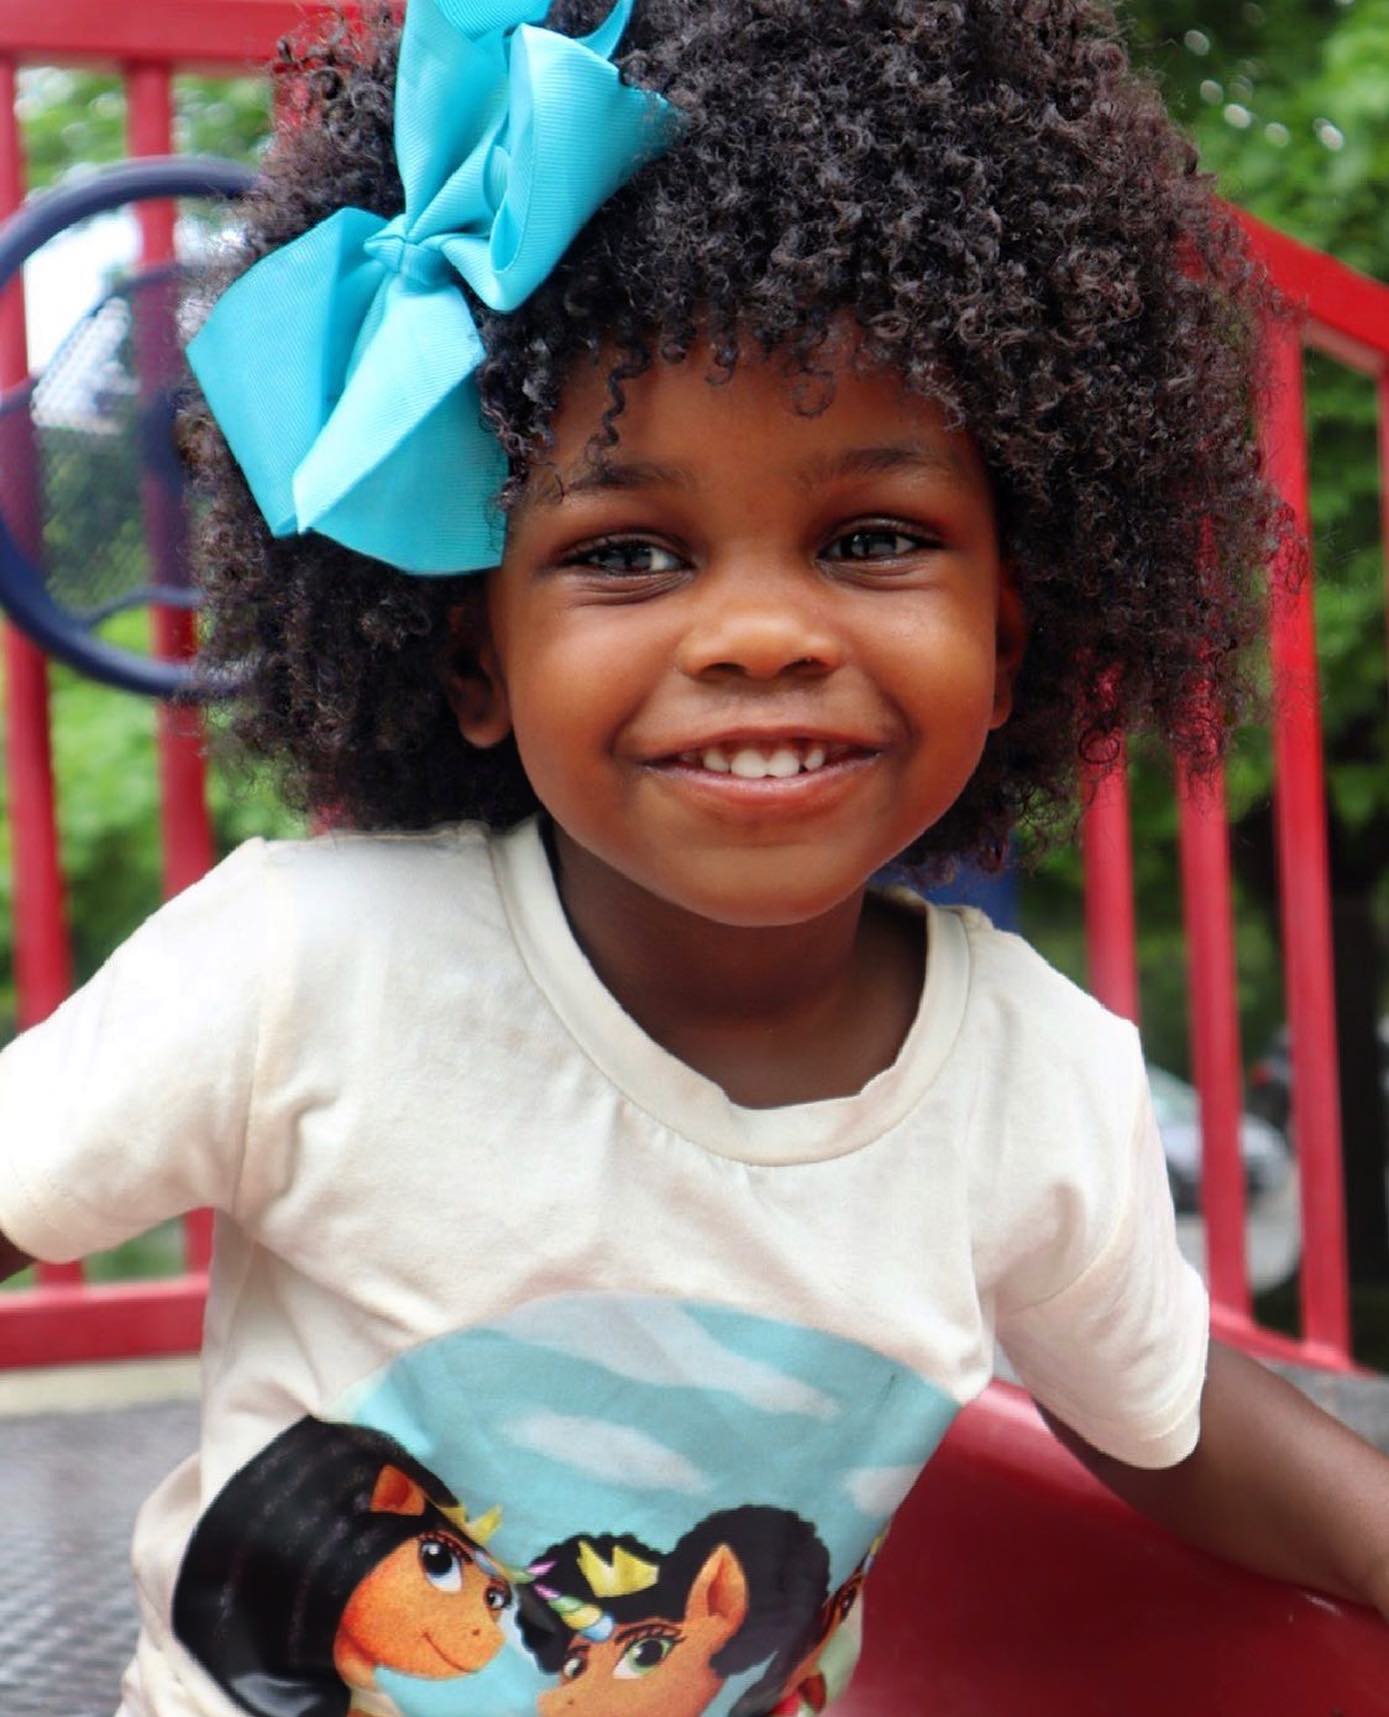 Regardless of whether or not you’re well-versed in taking care of your own curls or coils, caring for a child’s curly hair can be a real challenge. The child may have a different hair texture, porosity, or density than what you’re used to. Finding the right products for your little one can make all the difference. We’ve narrowed it down to a few kid friendly lines such as @sheamoisturebaby & KIDS, @curls KIDS, @auntjackiescurlsandcoils KIDS, @socozy , @frobabieshair , @curlyellie , @kinder.curls & @cantubeauty KIDS 